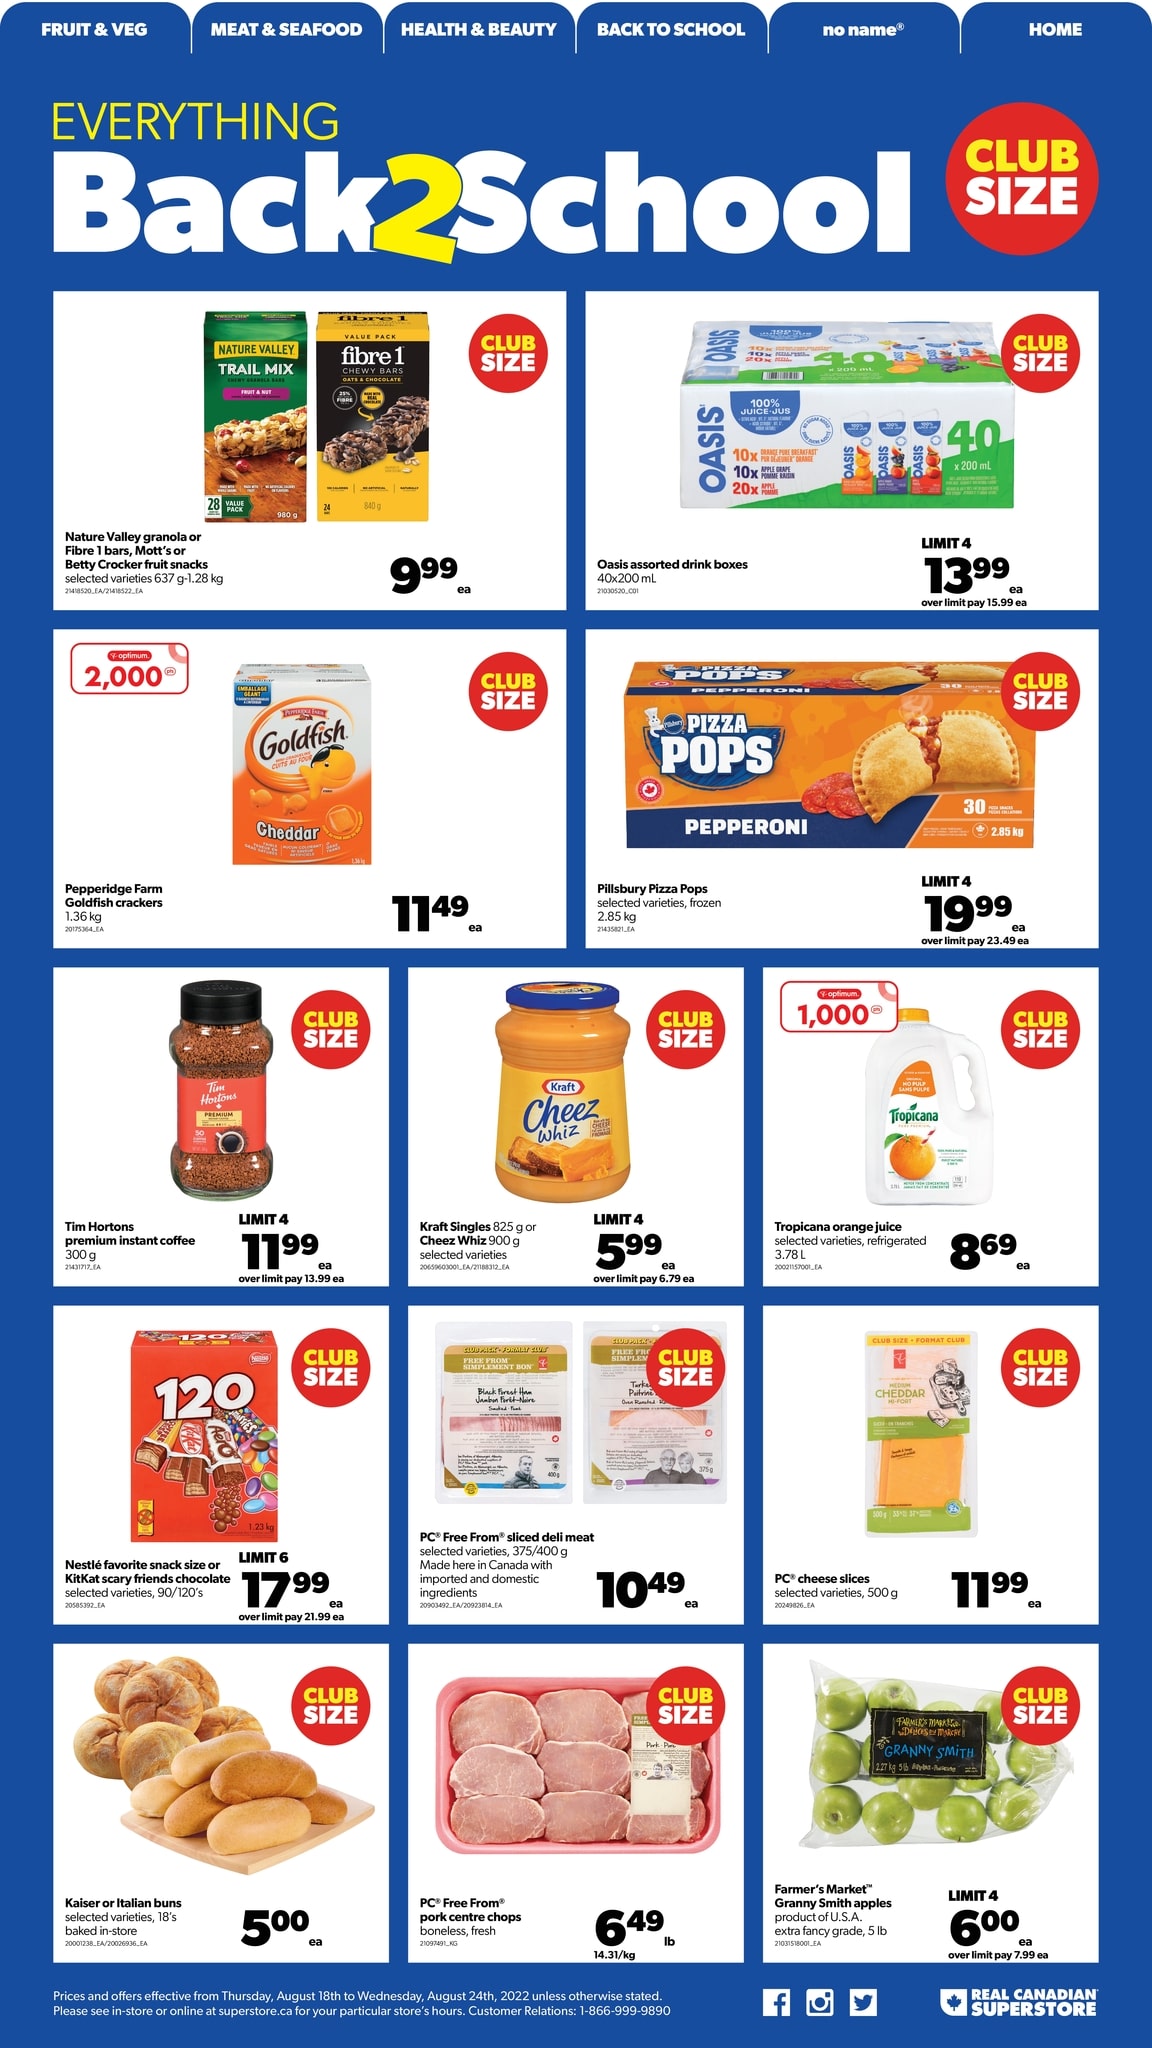 Real Canadian Superstore Western Canada - Weekly Flyer Specials - Page 5